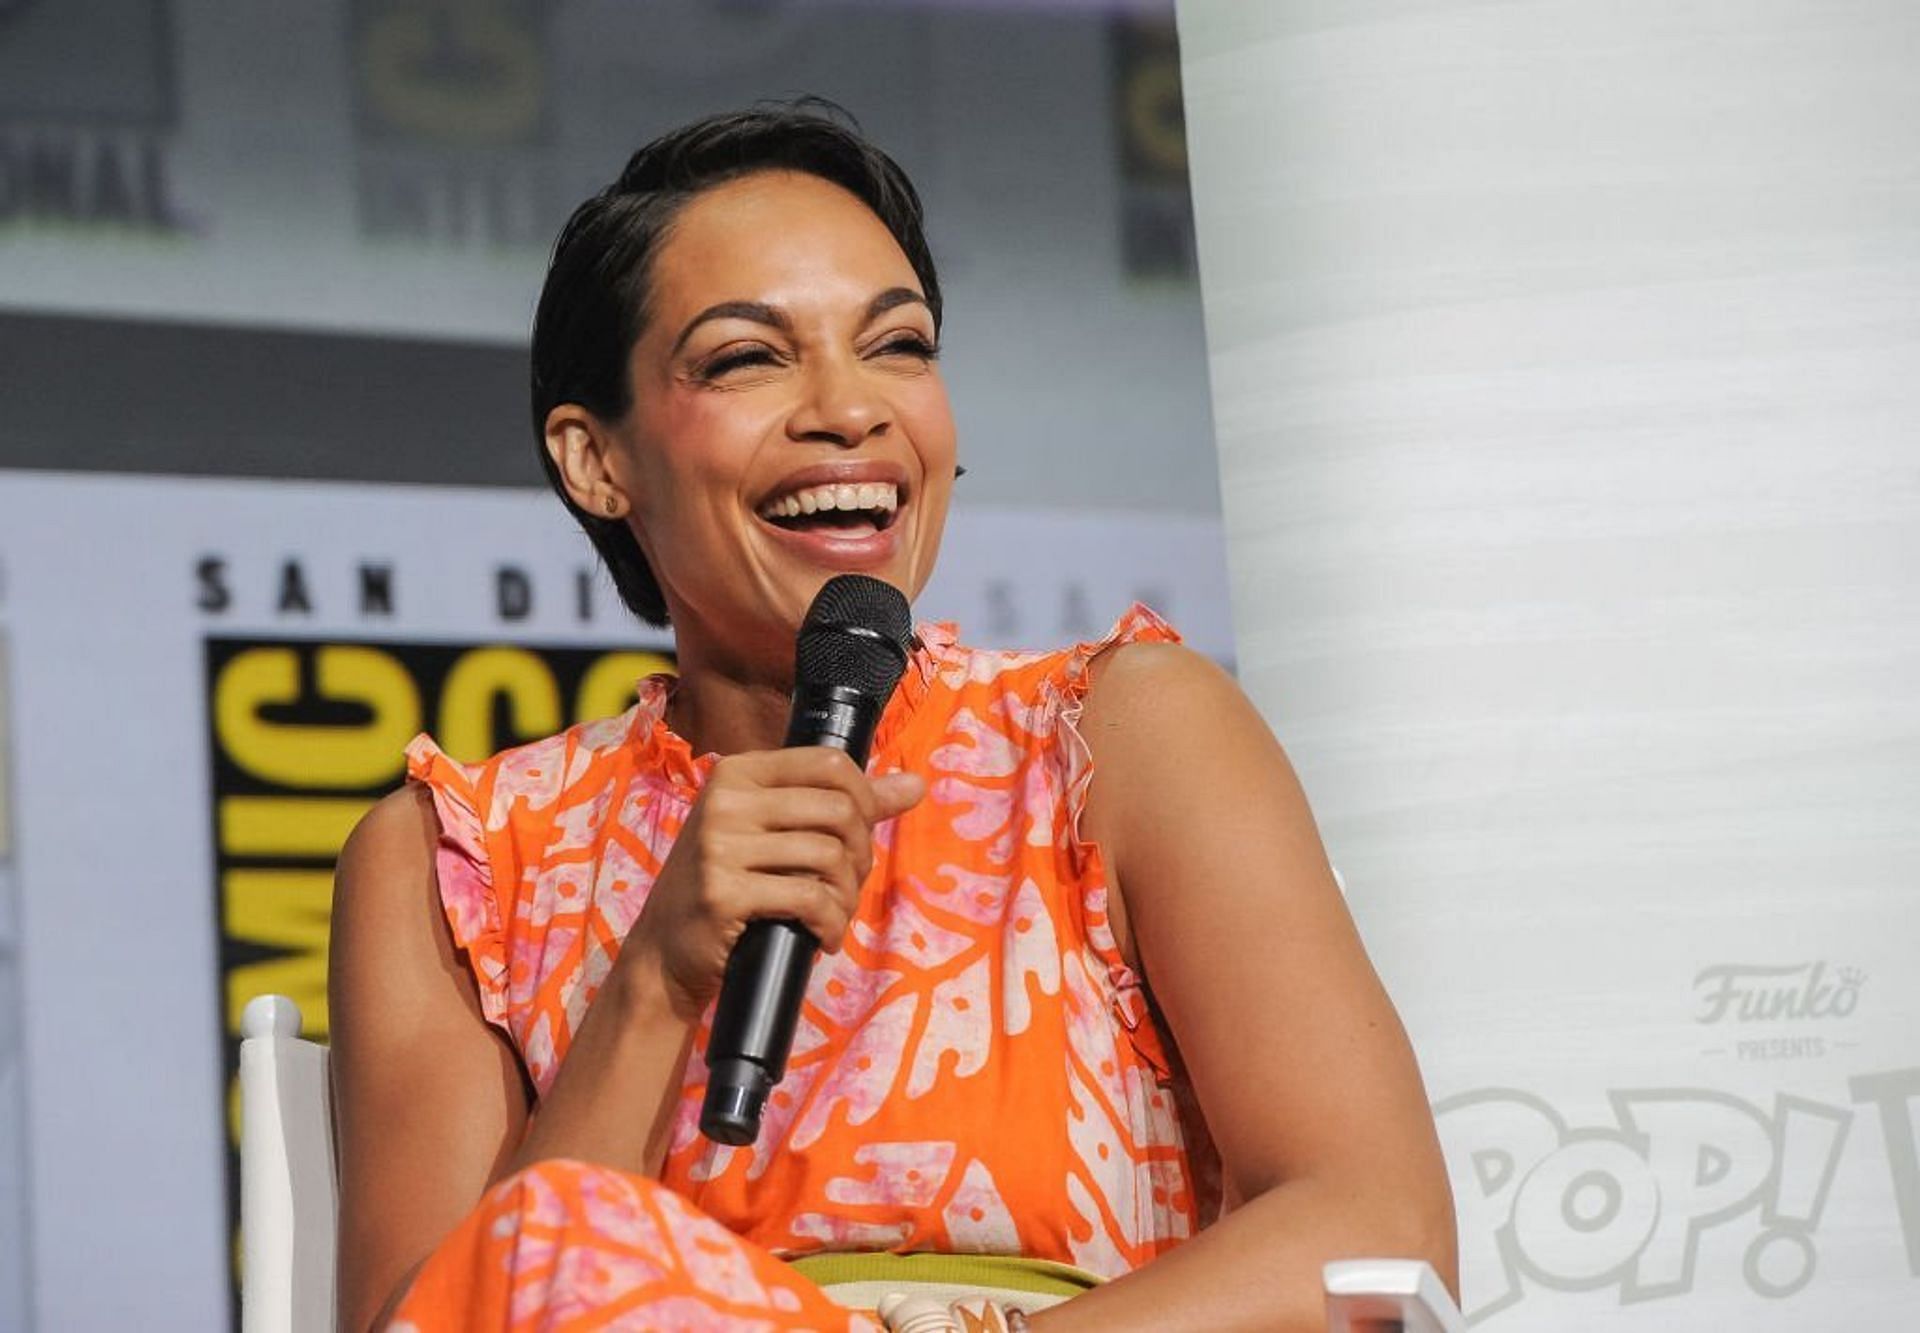 Rosario Dawson was recently spotted with her new beau in an Instagram video (Image via Albert L. Ortega/Getty Images)